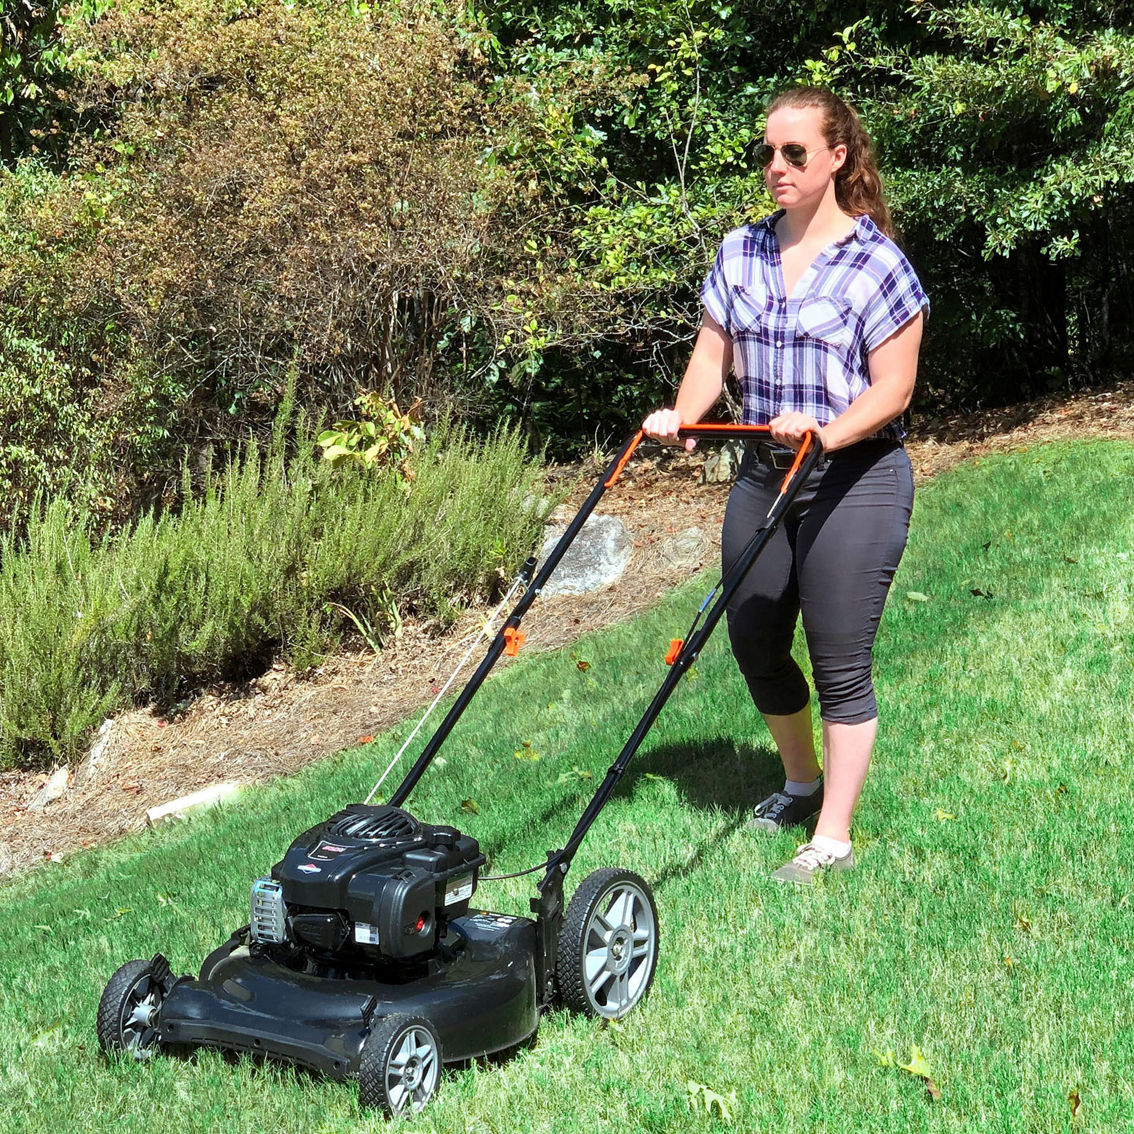 Yard Force 22 in. 2 in 1 Gas Push Mower - Image 5 of 5